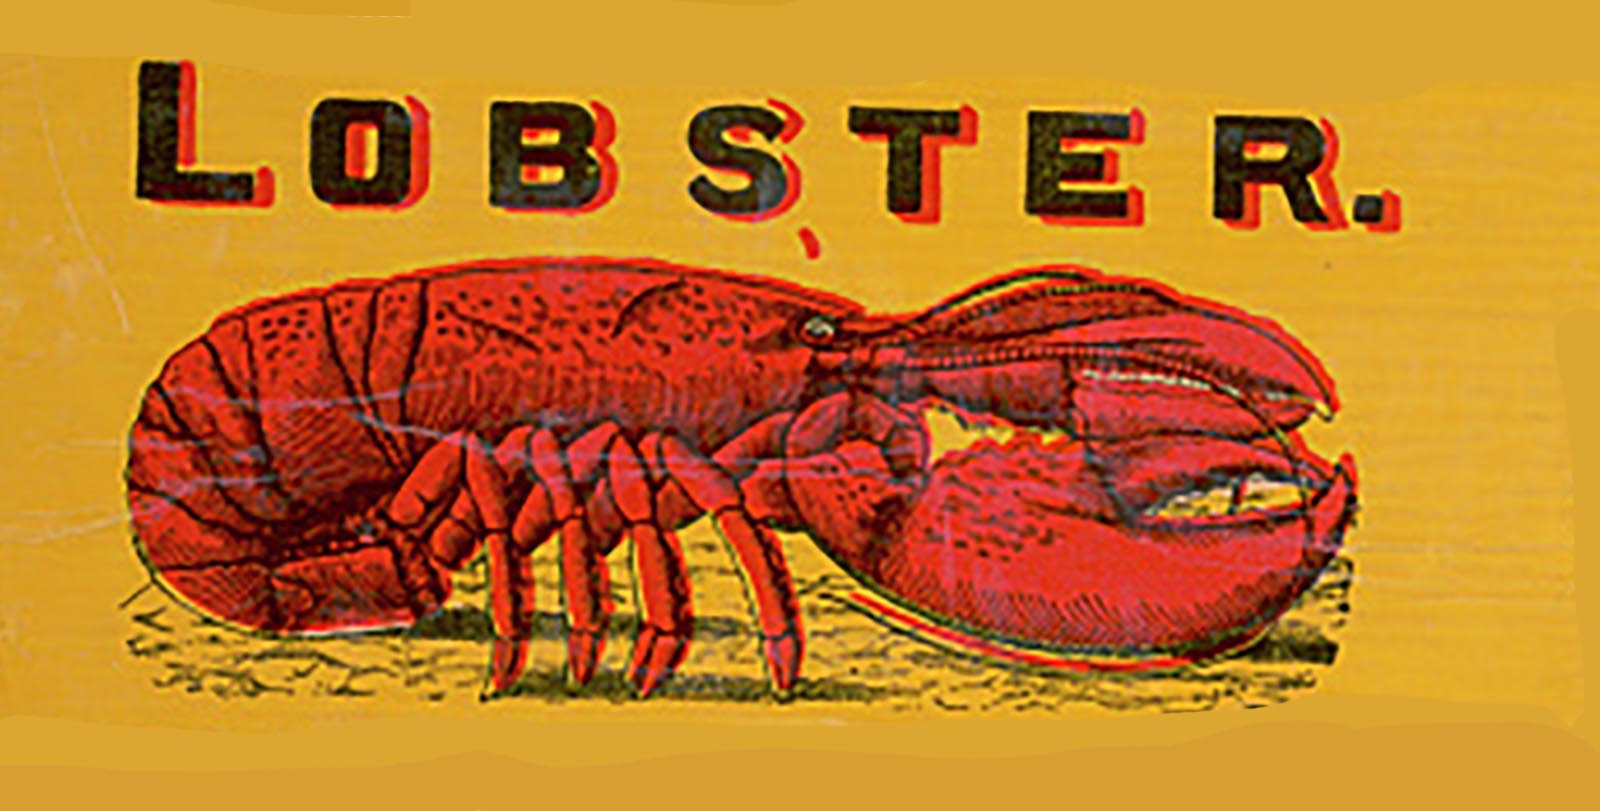 Taste the deliciously sweet lobster found in Maine waters. Catching these crustaceans has been a way of life for generations of New Englanders.